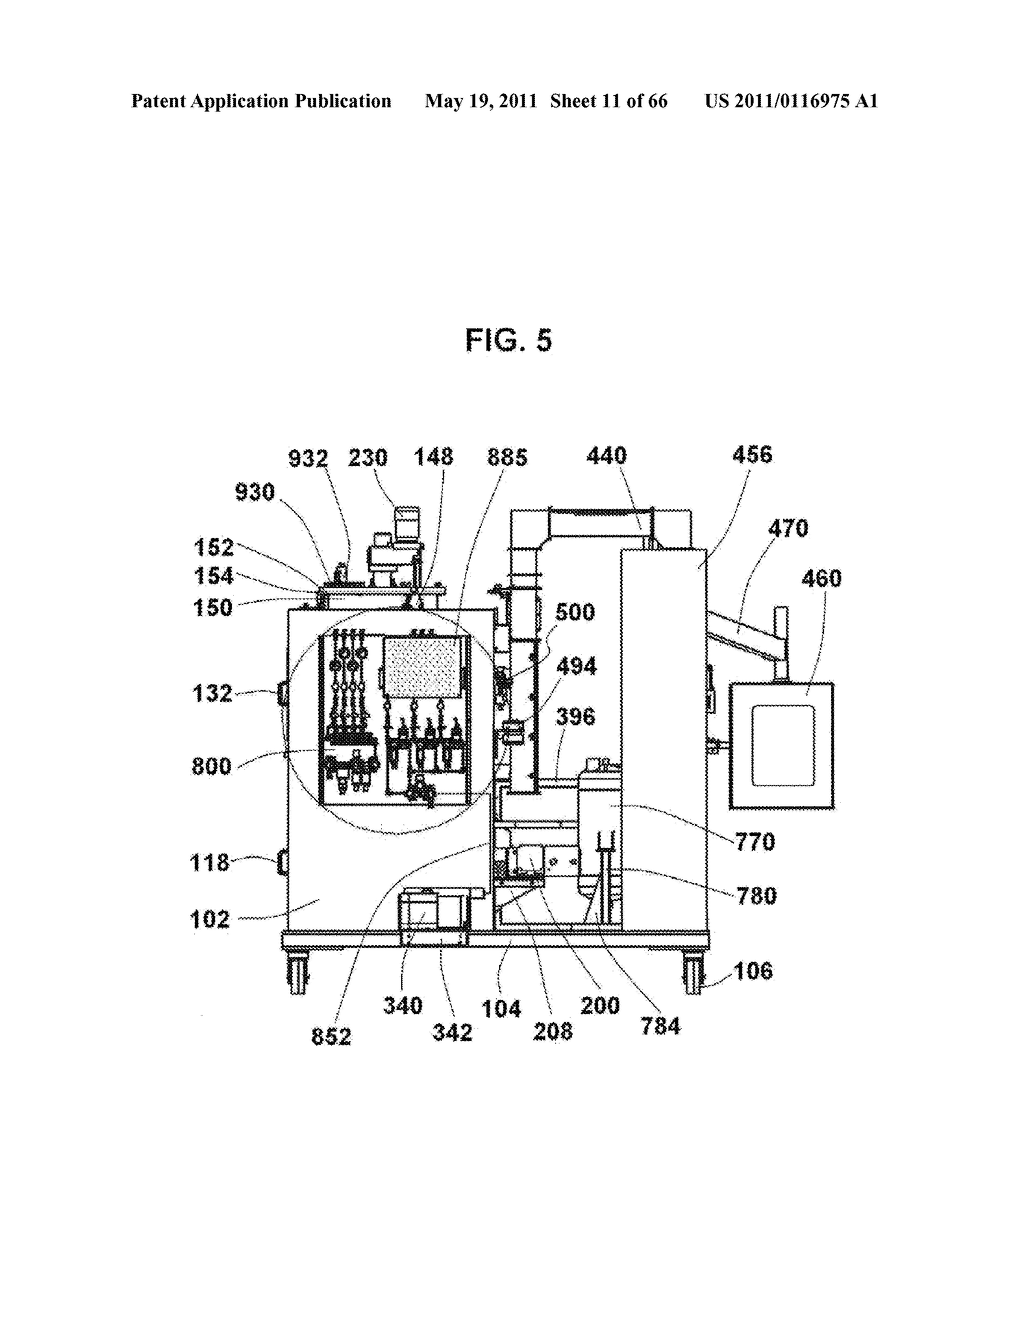 METHOD AND APPARATUS TO ACHIEVE FORMULATION AND REACTIVE POLYMERIZATION UTILIZING A THERMALLY AND ATMOSPHERICALLY CONTROLLED FEEDING SYSTEM FOR THERMOPLASTIC MATERIALS - diagram, schematic, and image 12